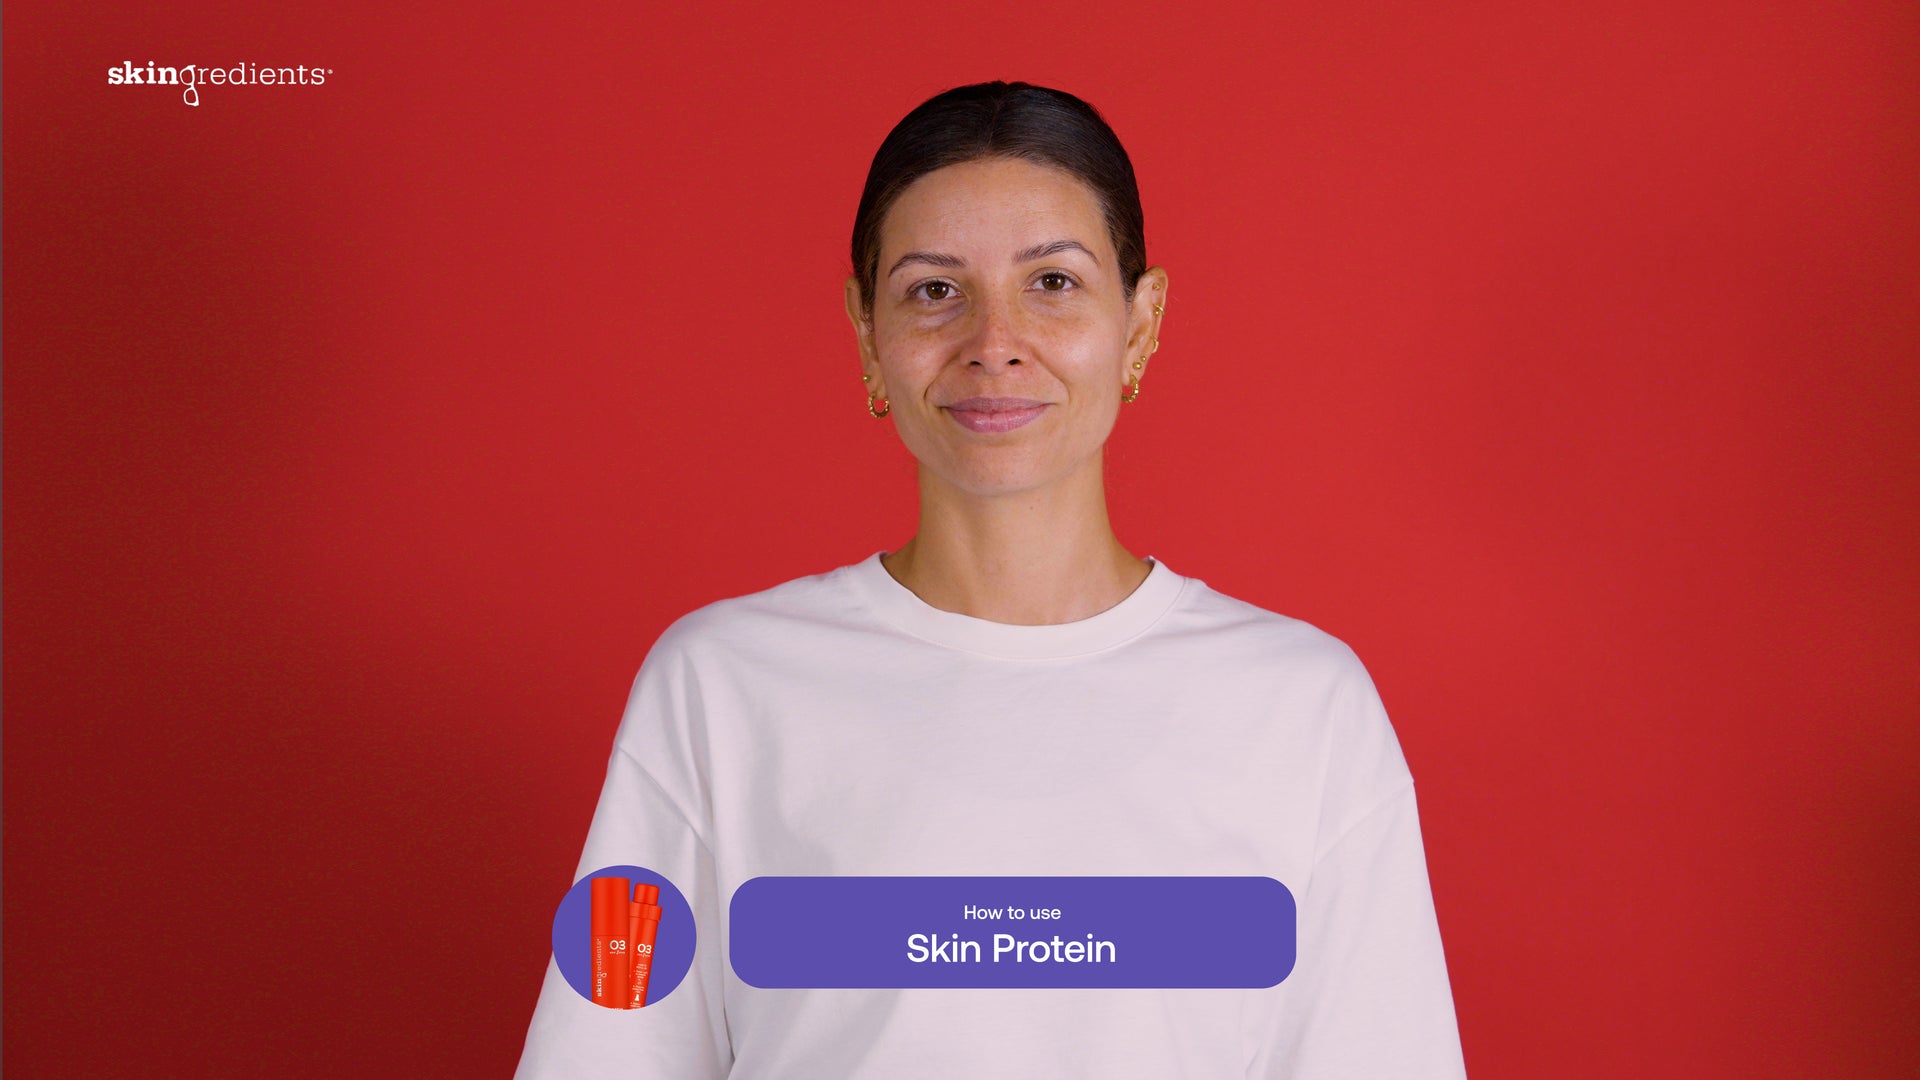 Load video: &lt;p&gt;&lt;span&gt;Skingredients® Skin Protein (45ml) is your skincare gamechanger – a lightweight, anti-ageing vitamin A, C + E serum. Like a genie (in a red bottle), Skin Protein grants 3 wishes: tighter, brighter + smoother skin. It’s a creamy, hydrating serum to be slathered on your face, eyes, neck + chest! Protein gives your body the strength it needs, and Skin Protein’s rock star ingredient, retinyl palmitate (read: the fatty form of vitamin A that’s much gentler on the skin), works to maintain strong + healthy skin. Retinyl palmitate, accompanied by beta carotene (a precursor to vitamin A), promises to speed up cell renewal + re-educate the skin for regeneration station. Our Skin Protein also contains a pro-collagen peptide to plump fine lines + wrinkles, vitamins C + E, which are powerful antioxidants that help to neutralise the ageing effects of free radical activity, and skin-soothing rooibos tea + green tea extract for added antioxidant goodness – because you can never have enough! Skin Protein is the 03® step in our KeyFour product range. Use it in the AM + PM to tackle a line-up of skin concerns, including dullness, lines and wrinkles, lax skin, dark circles, blackheads, whiteheads, lumps, bumps, large pores and excessive oiliness. Vitamin A is a skincare hero to guarantee visible results. It’s progressive enough for daily use, yet effective so you can quickly achieve noticeable results. After falling in love with 03® (aka the red one) and using every last pump, keep your primary pack and switch to buying a refill tube next time. This Primary Pack tube is your tube-for-life that’s made from resilient, ultra-durable materials. &lt;/span&gt;&lt;/p&gt;